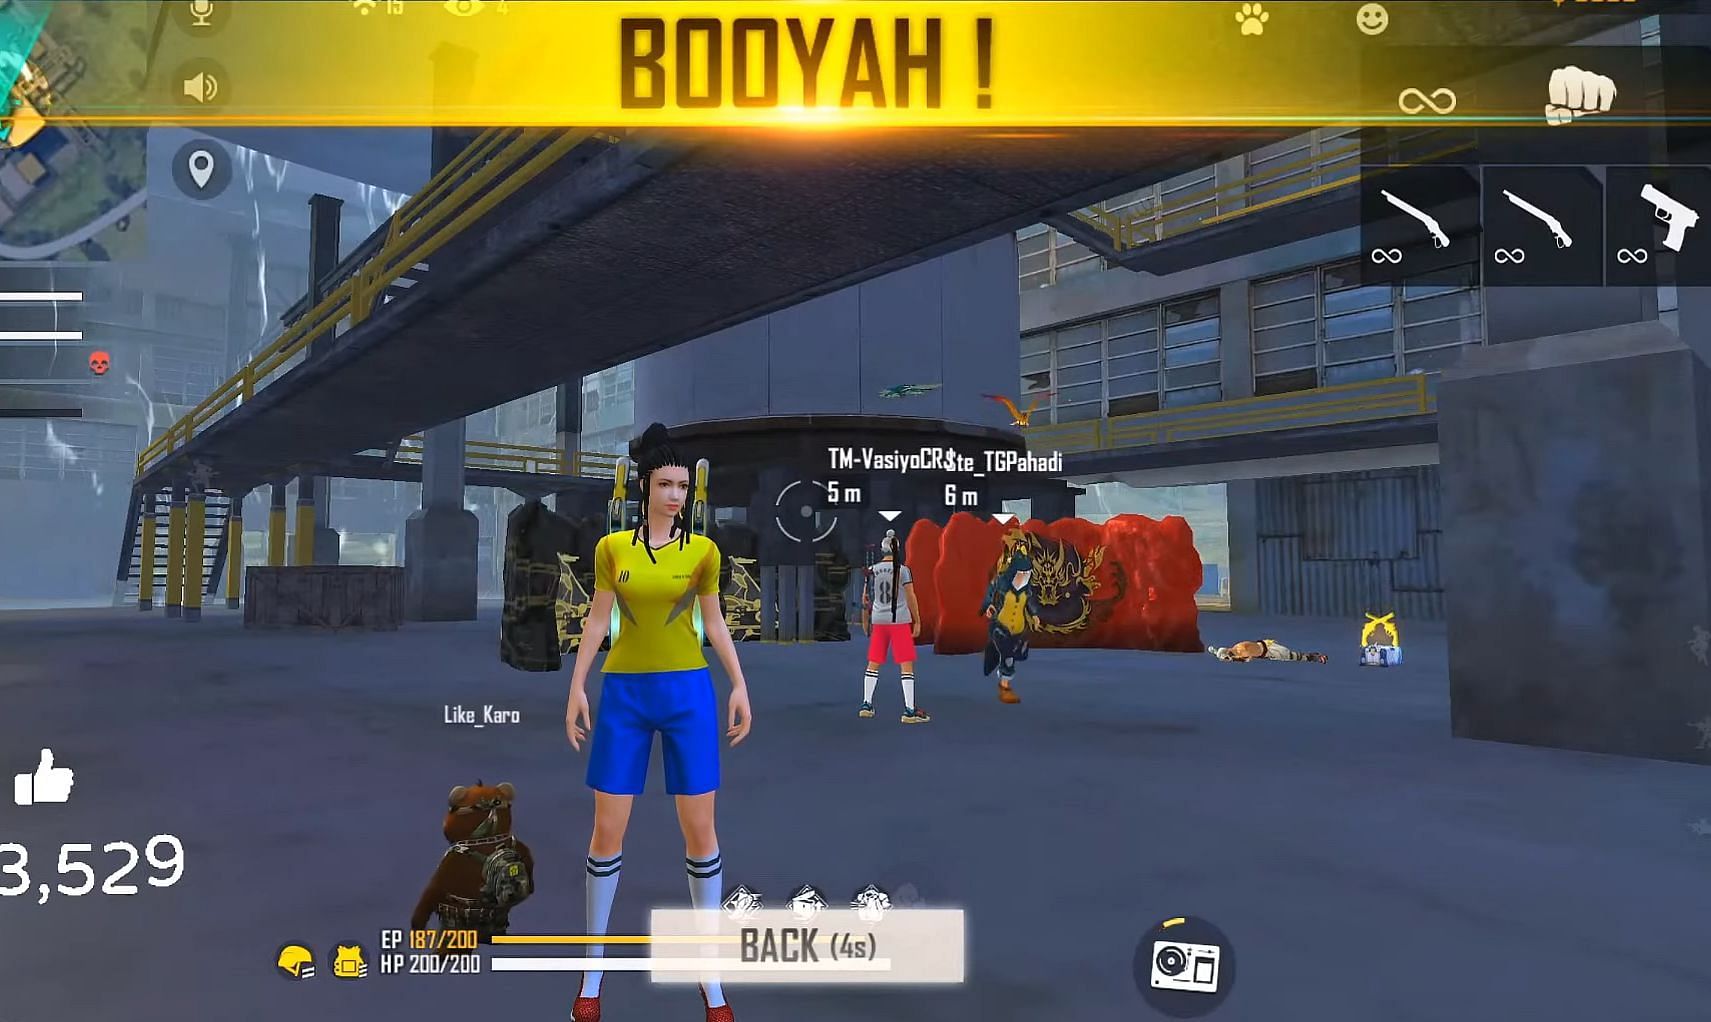 Booyah earns the maximum rank points (Image via Total Gaming Live)